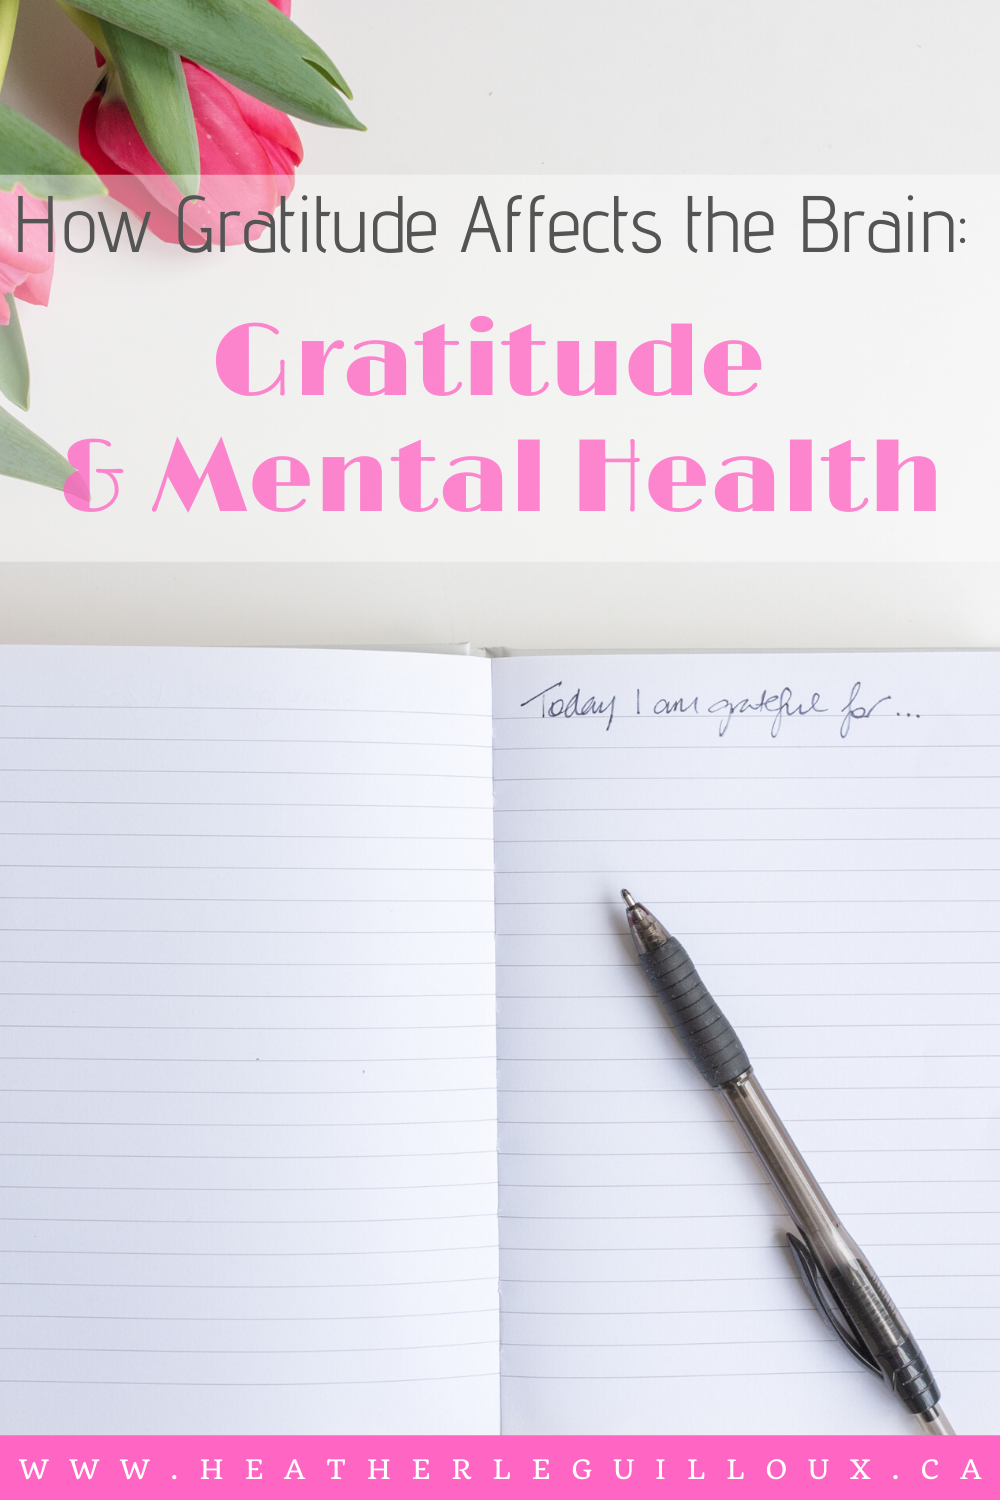 This experiment suggests that gratitude affects the brain with complex social emotions. Gratitude and mental health go hand in hand. This guest article will explore the physiological and psychological aspects of how showing gratitude can positively (or negatively) impact on a person. #gratitude #mentalhealth #mentalhealthblog #anxiety #depression